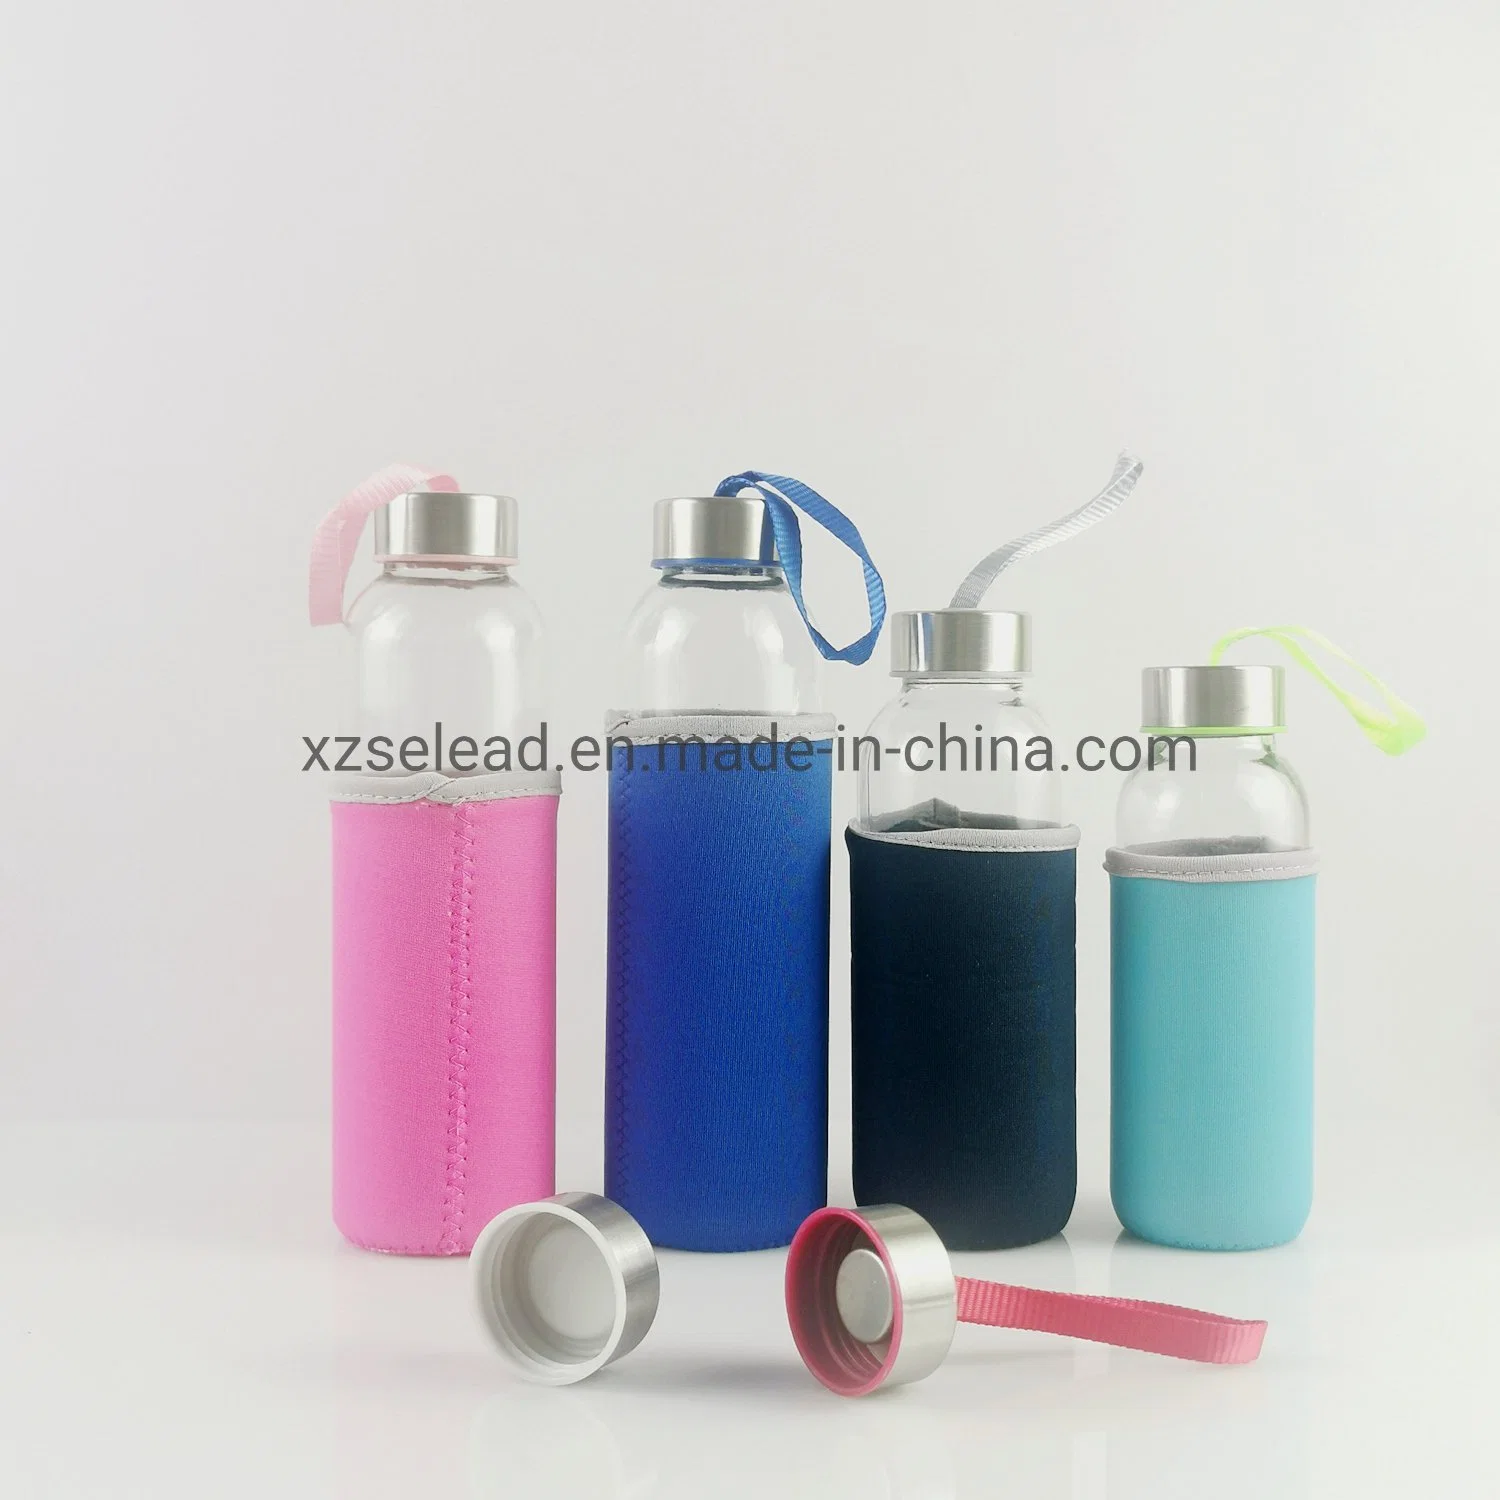 500ml Juice Beverages Glass Water Bottle with Bamboo/Stainless Steel Leak-Proof Caps & Sleeve